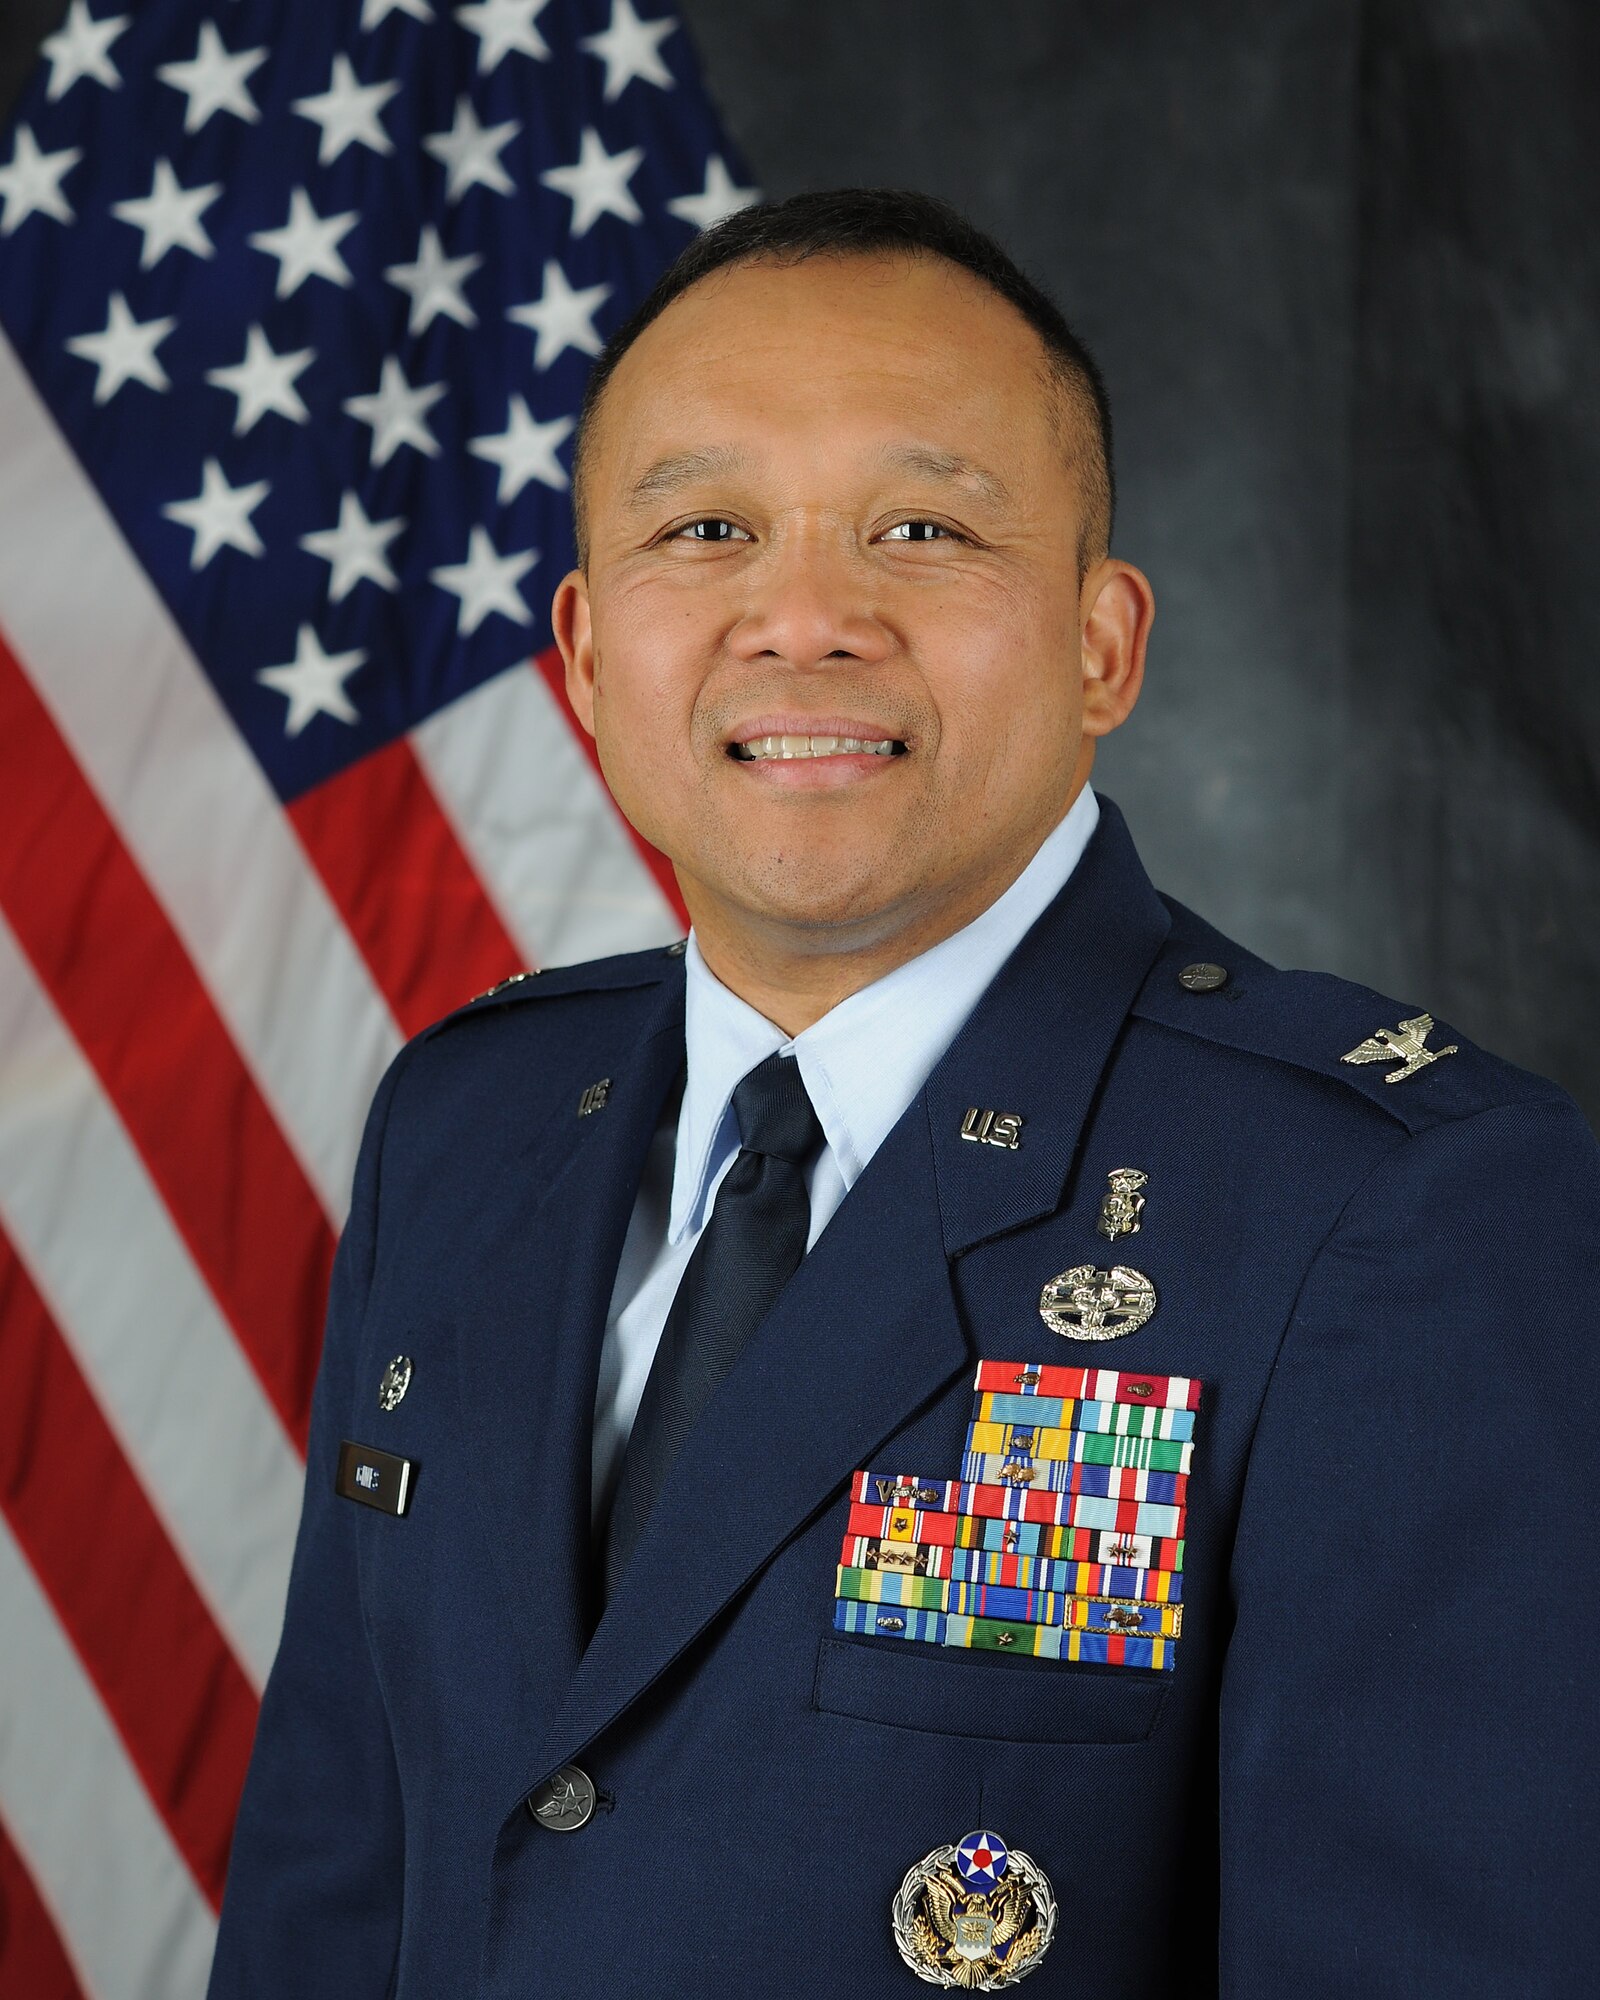 Though combat is thousands of miles away from Travis Air Force Base, California, Col. Erwin Gines, 60th Inpatient Squadron commander at David Grant USAF Medical Center, Fairfield, California frequently leans on the first truth, that humans are more important that hardware. 